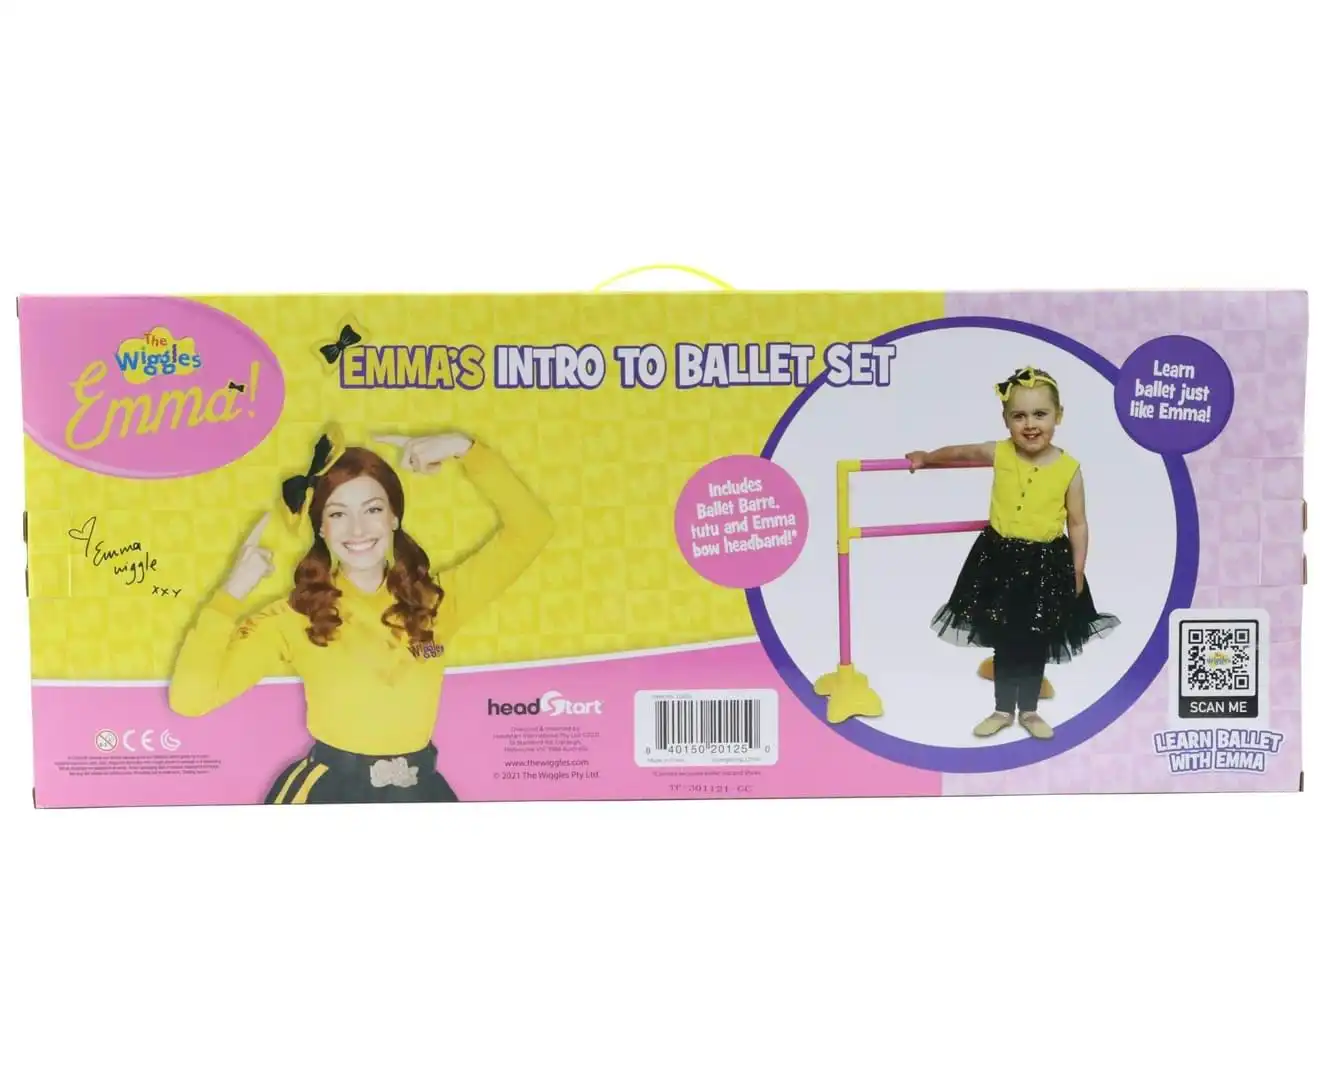 The Wiggles Bow Intro to Ballet